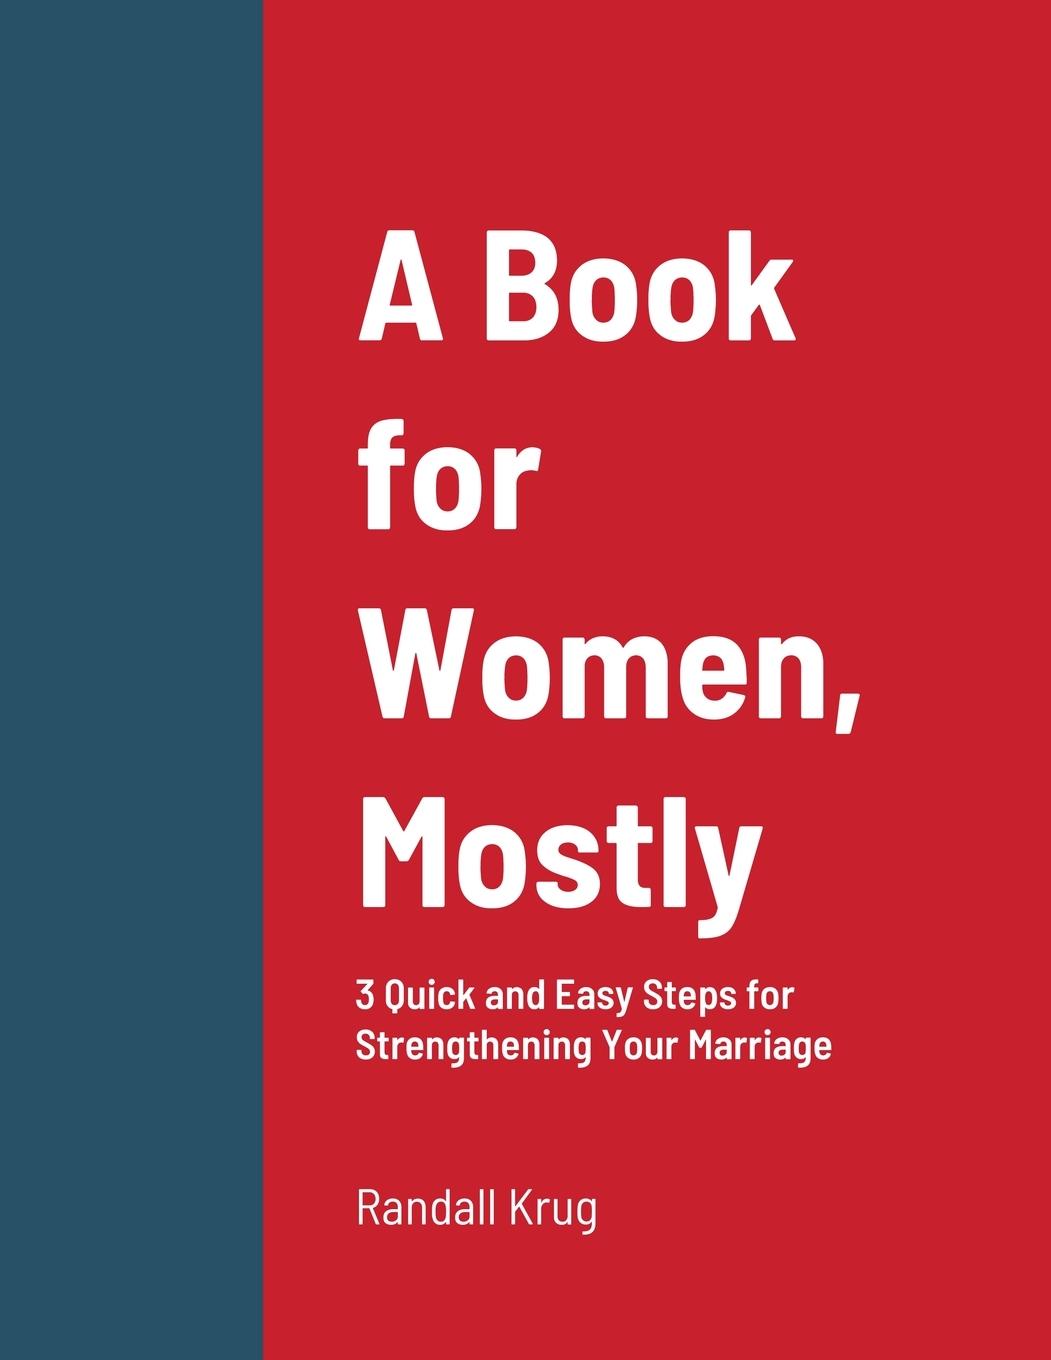 Könyv Book for Women, Mostly - 3 Quick and Easy Steps for Strengthening Your Marriage 